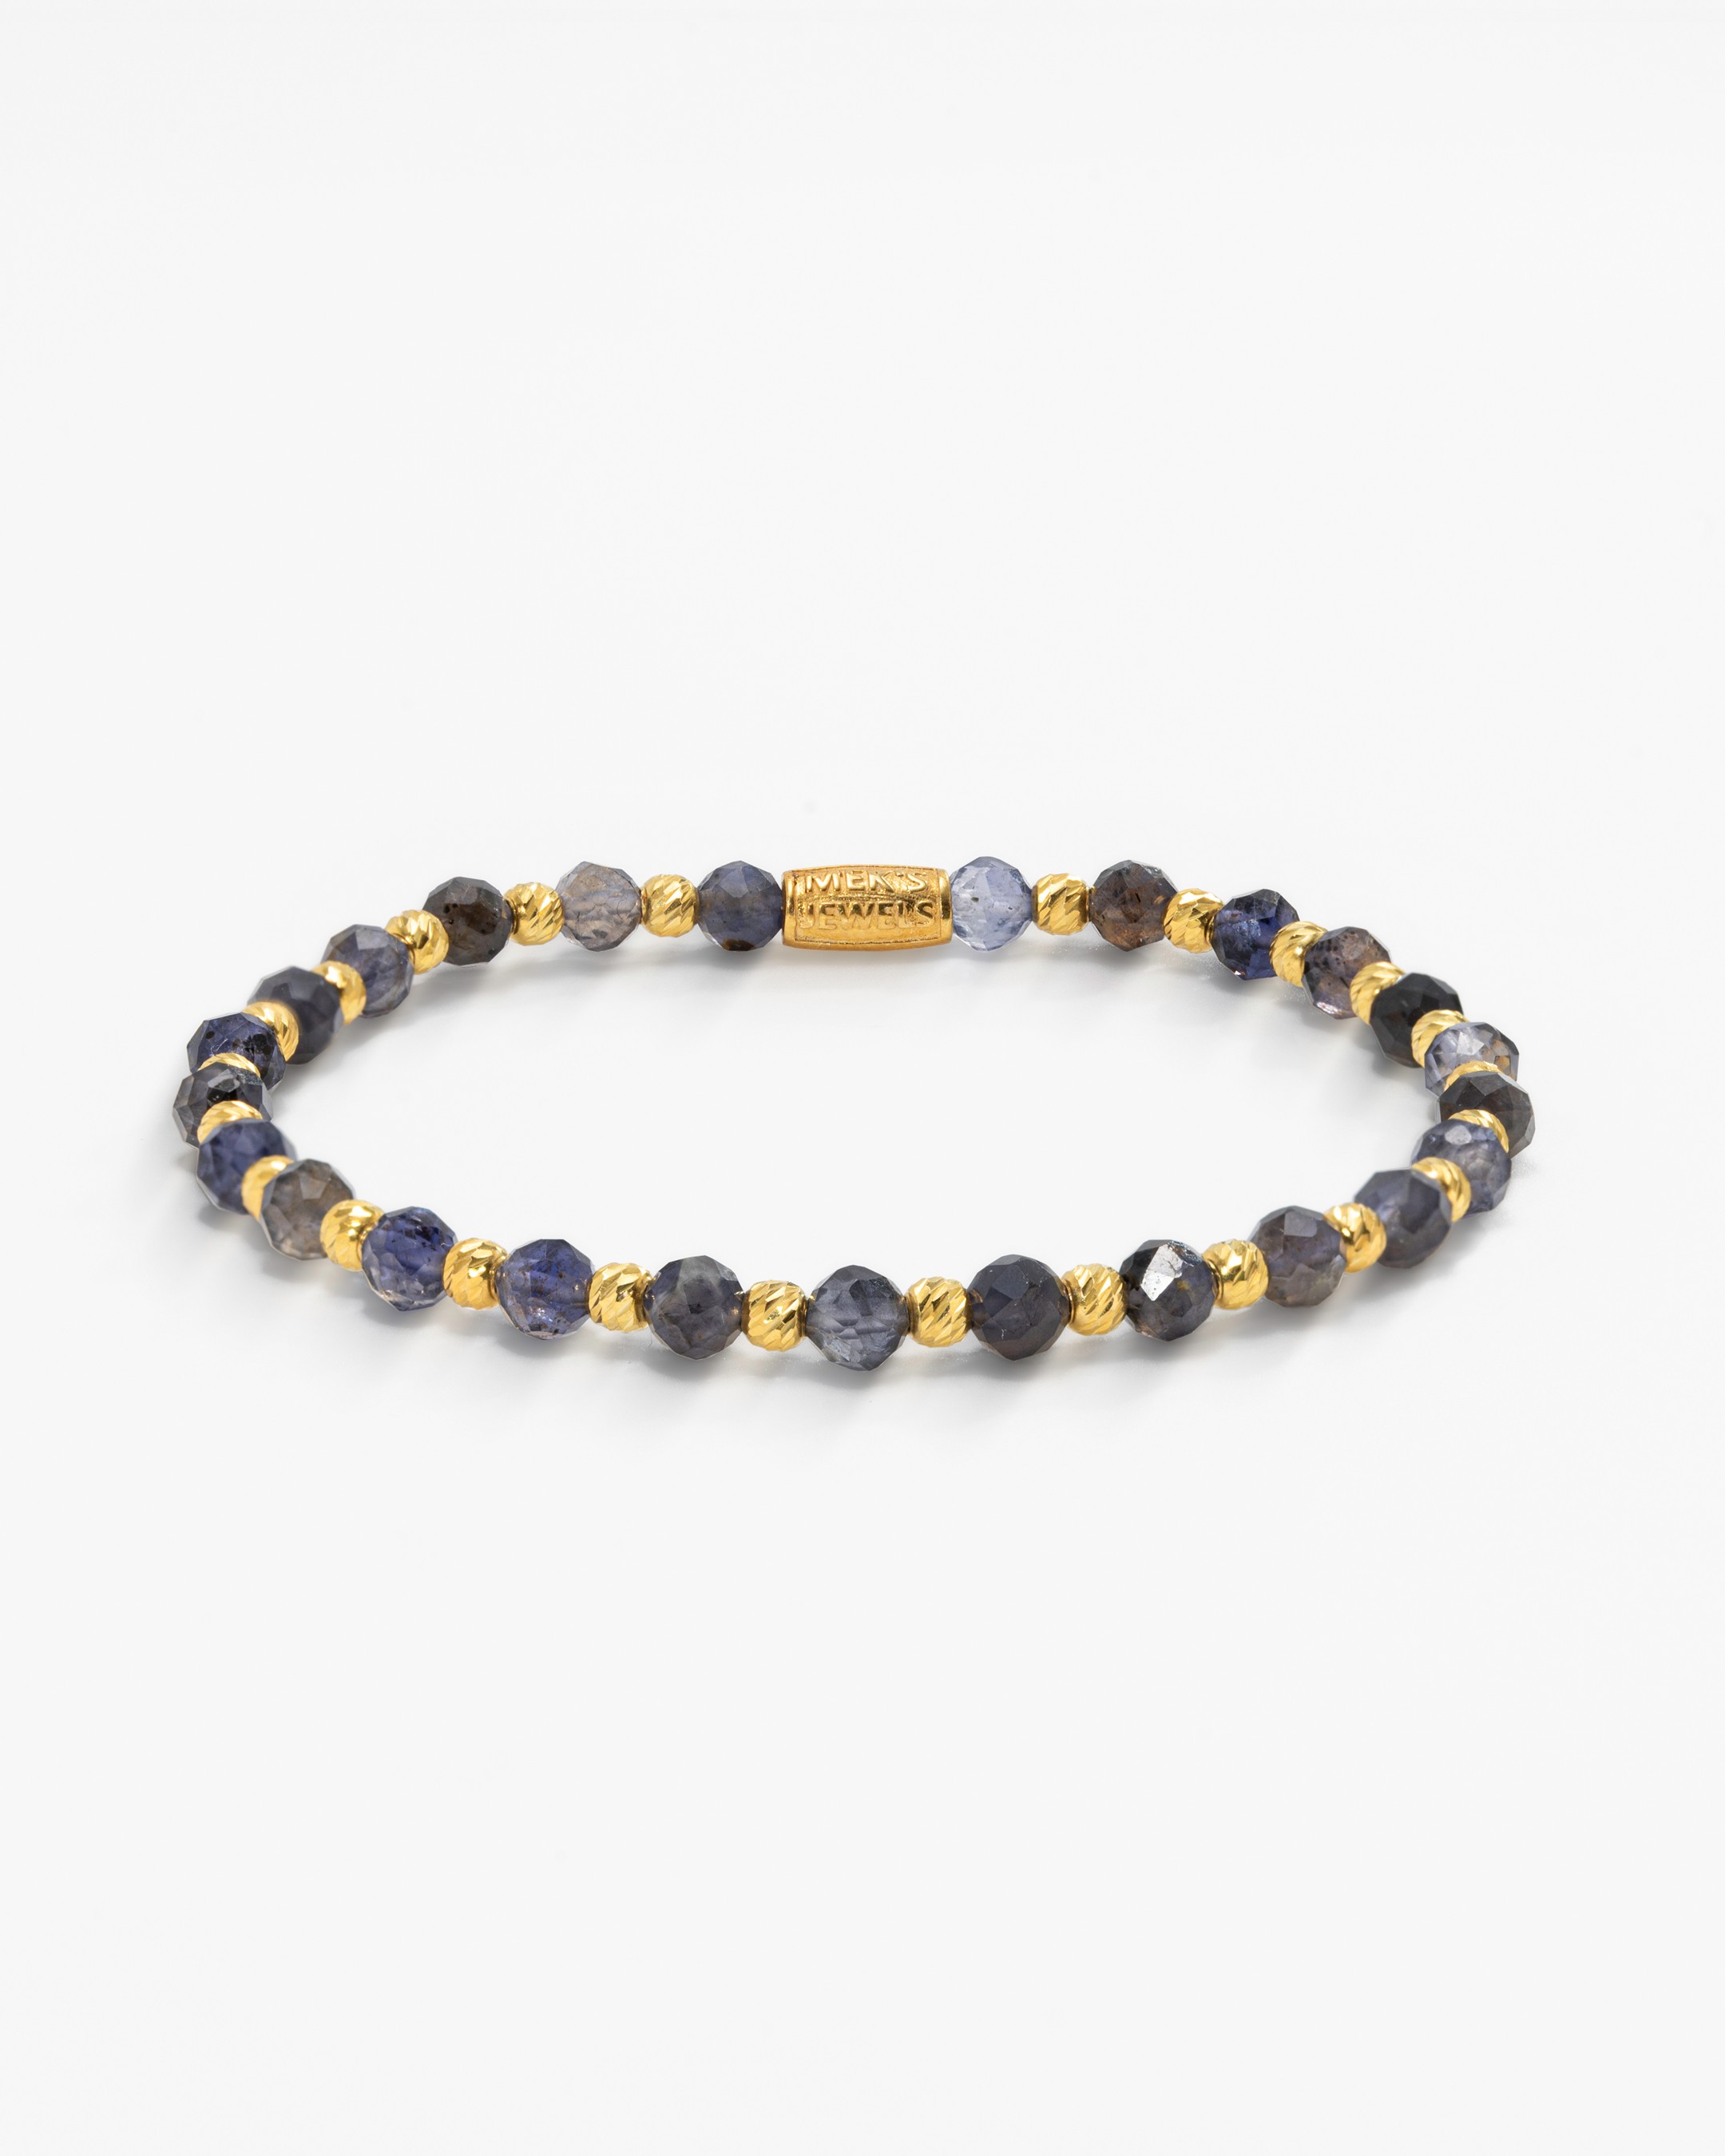 11.85 Carat Silver Bracelet with Natural Iyolite Stone - Gold